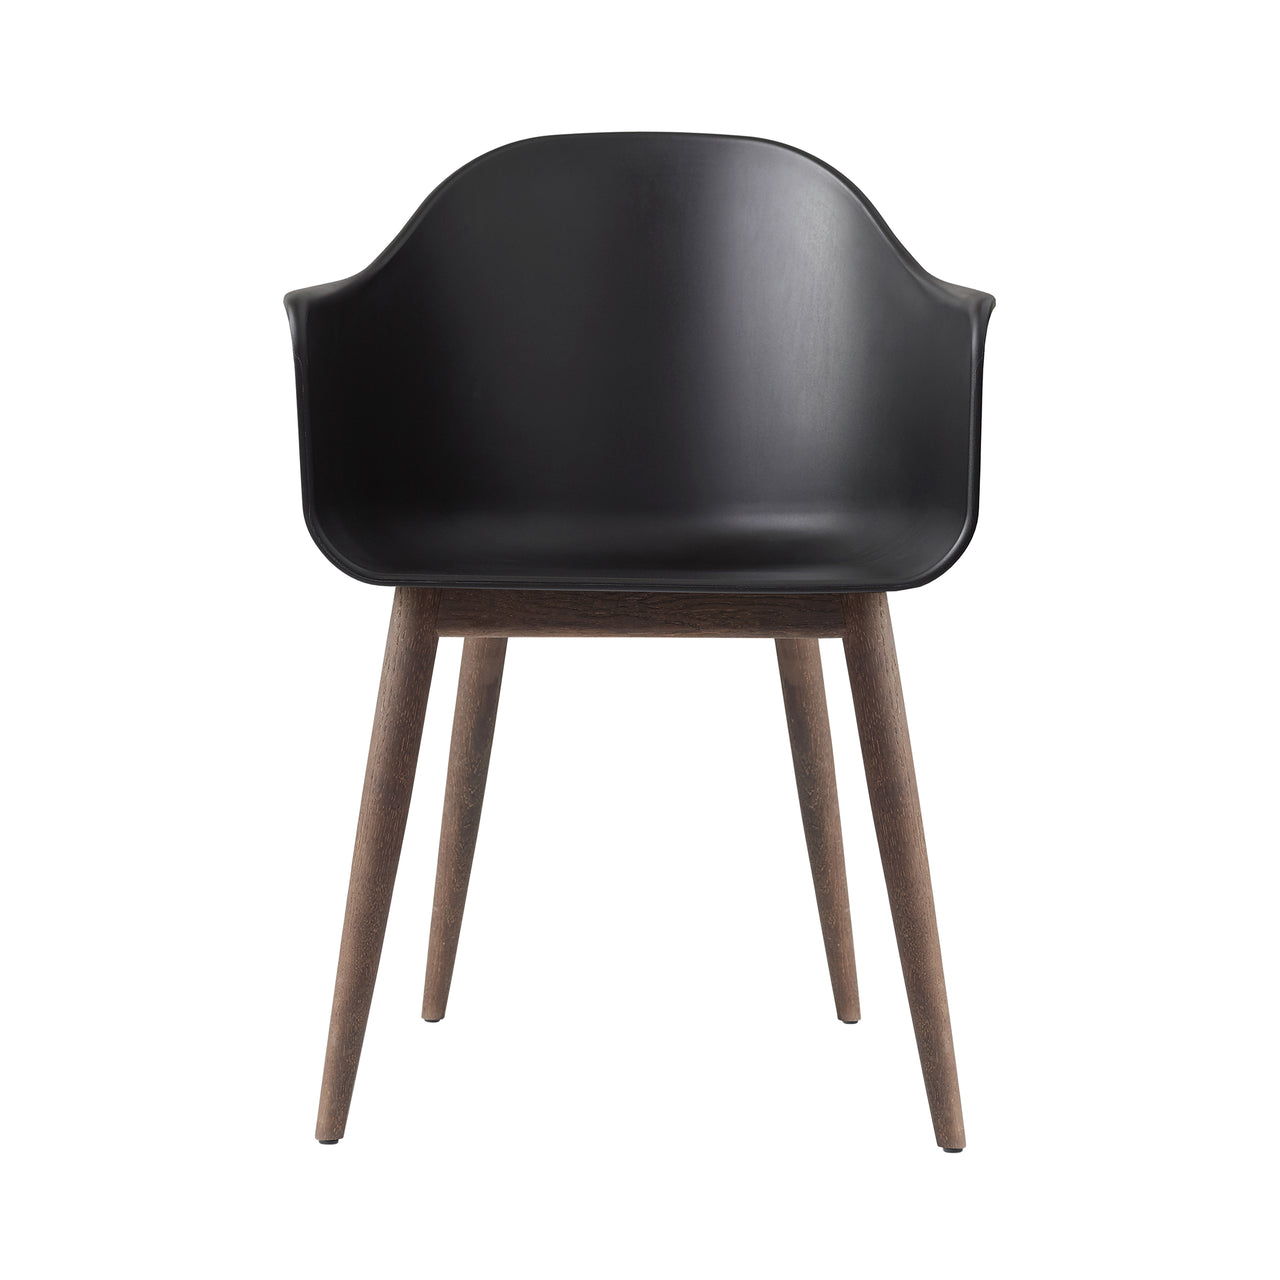 Harbour Dining Chair: Wood Base + Dark Stained Oak + Black